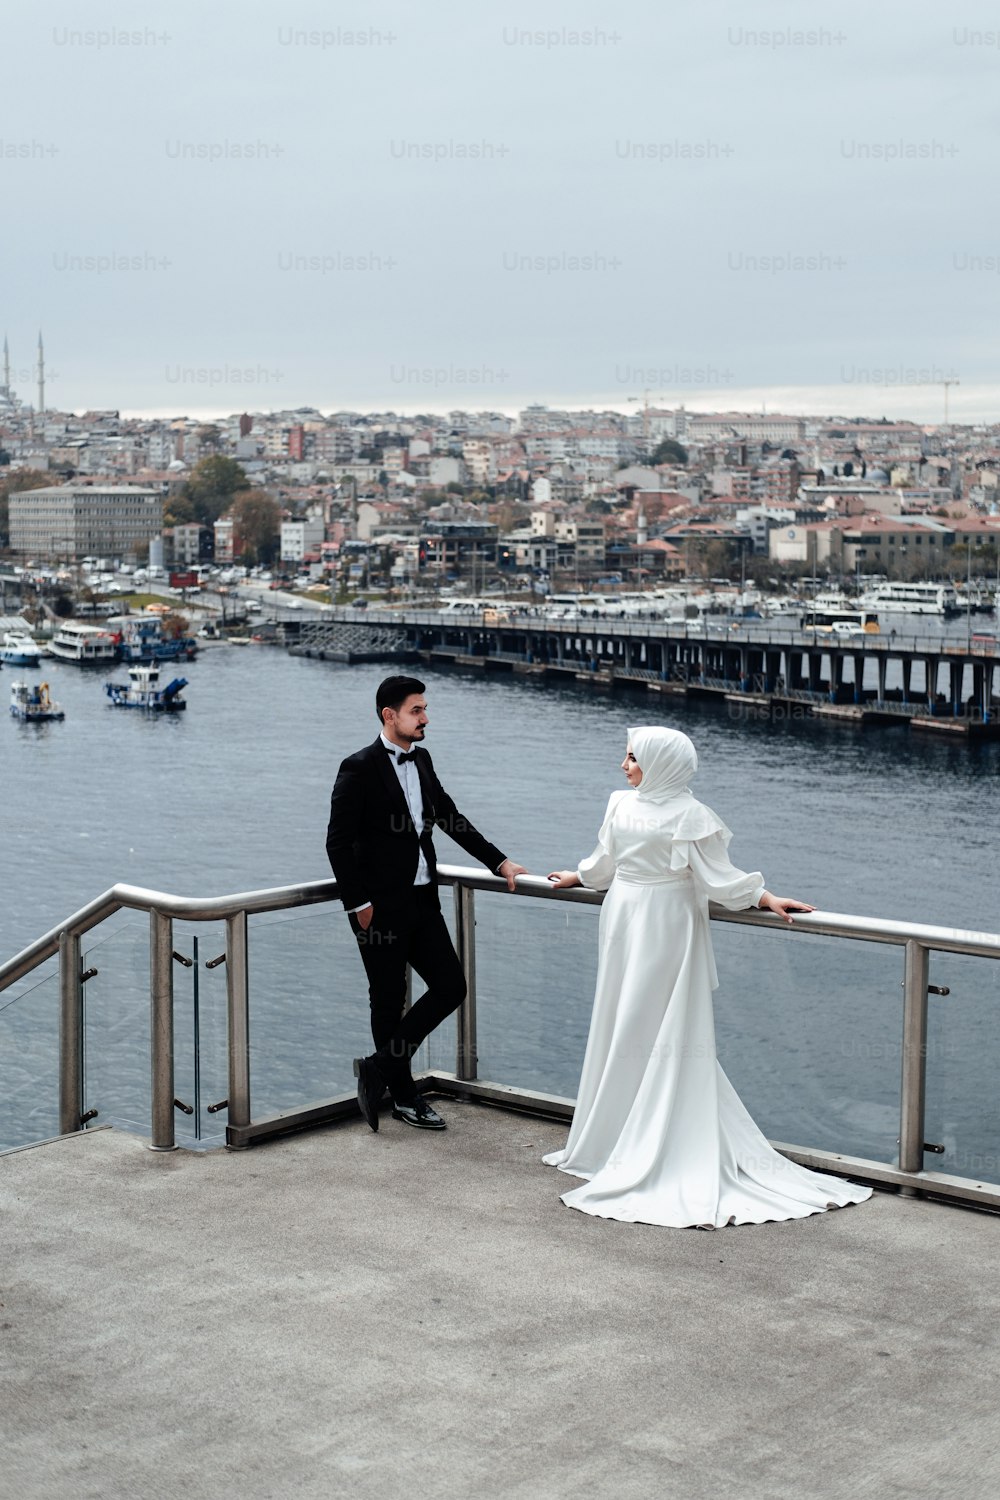 a man and woman in wedding attire standing on a bridge over water